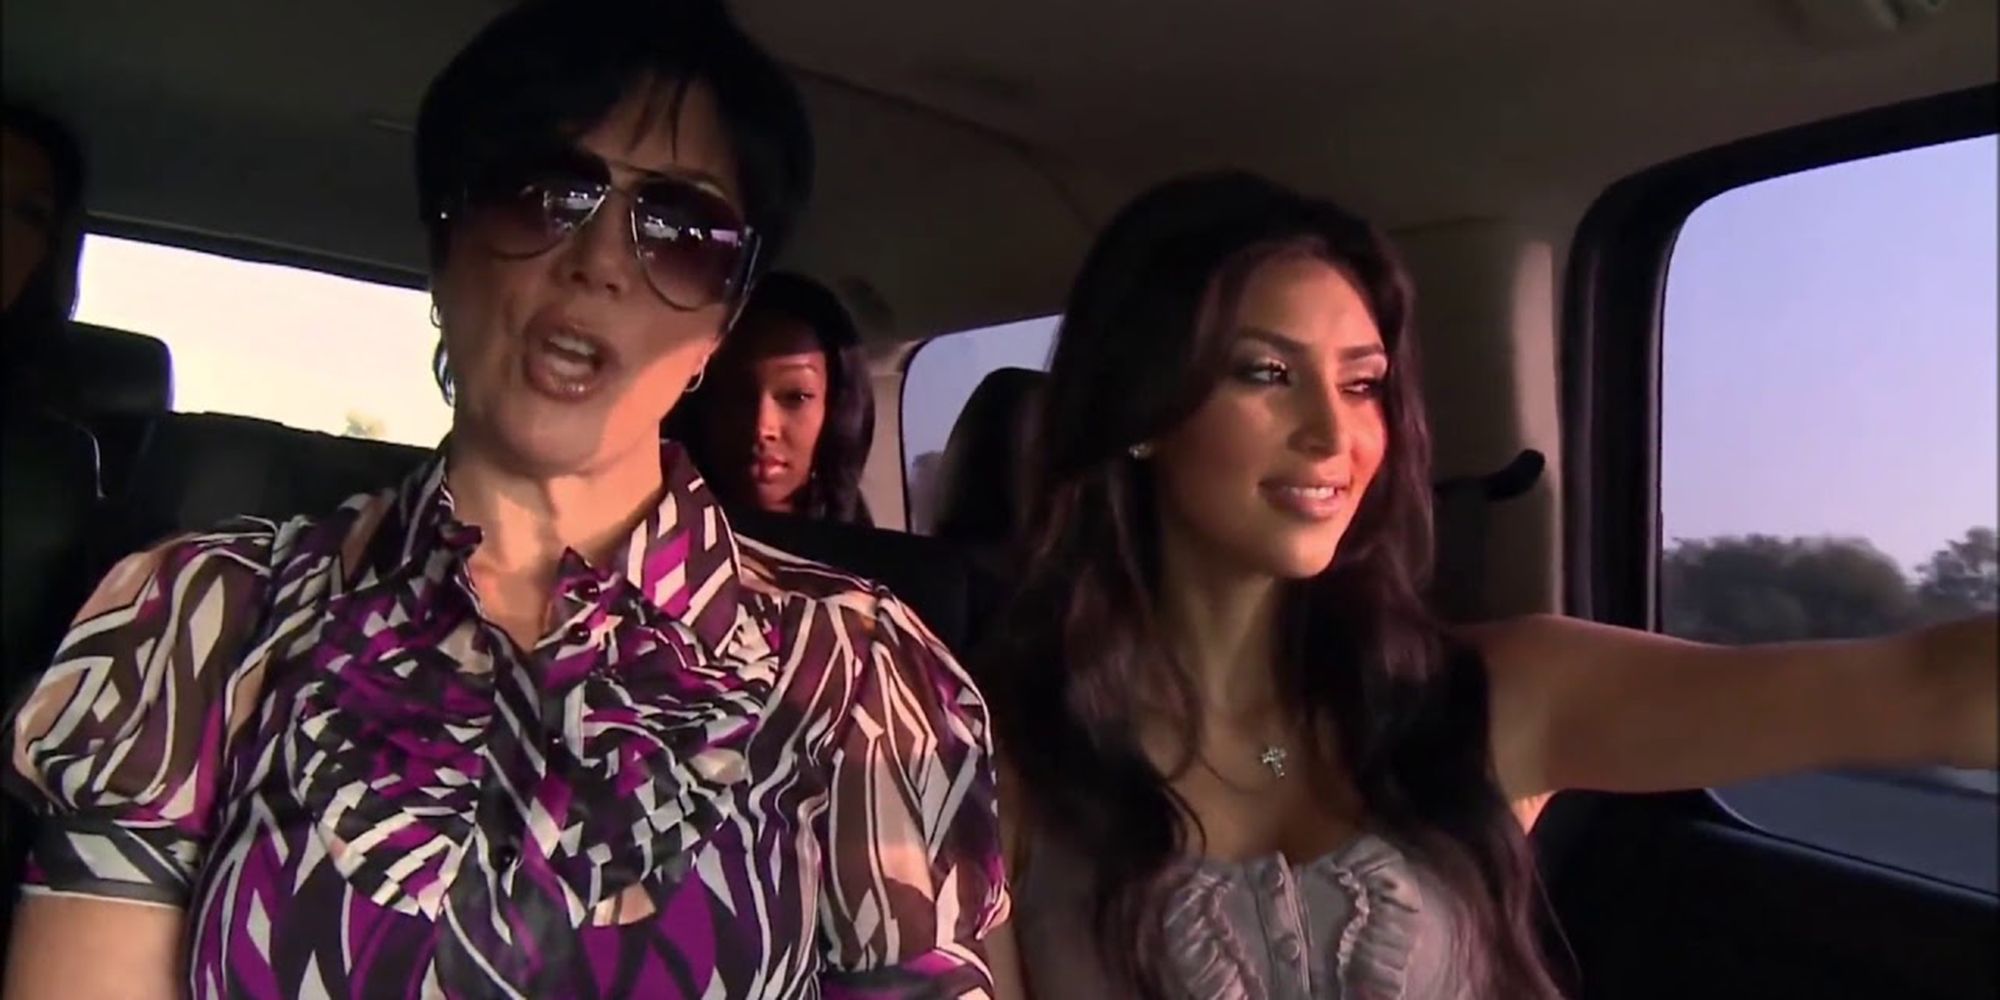 Kim click selfies while taking Khloe to jail in Keeping Up with the Kardashians